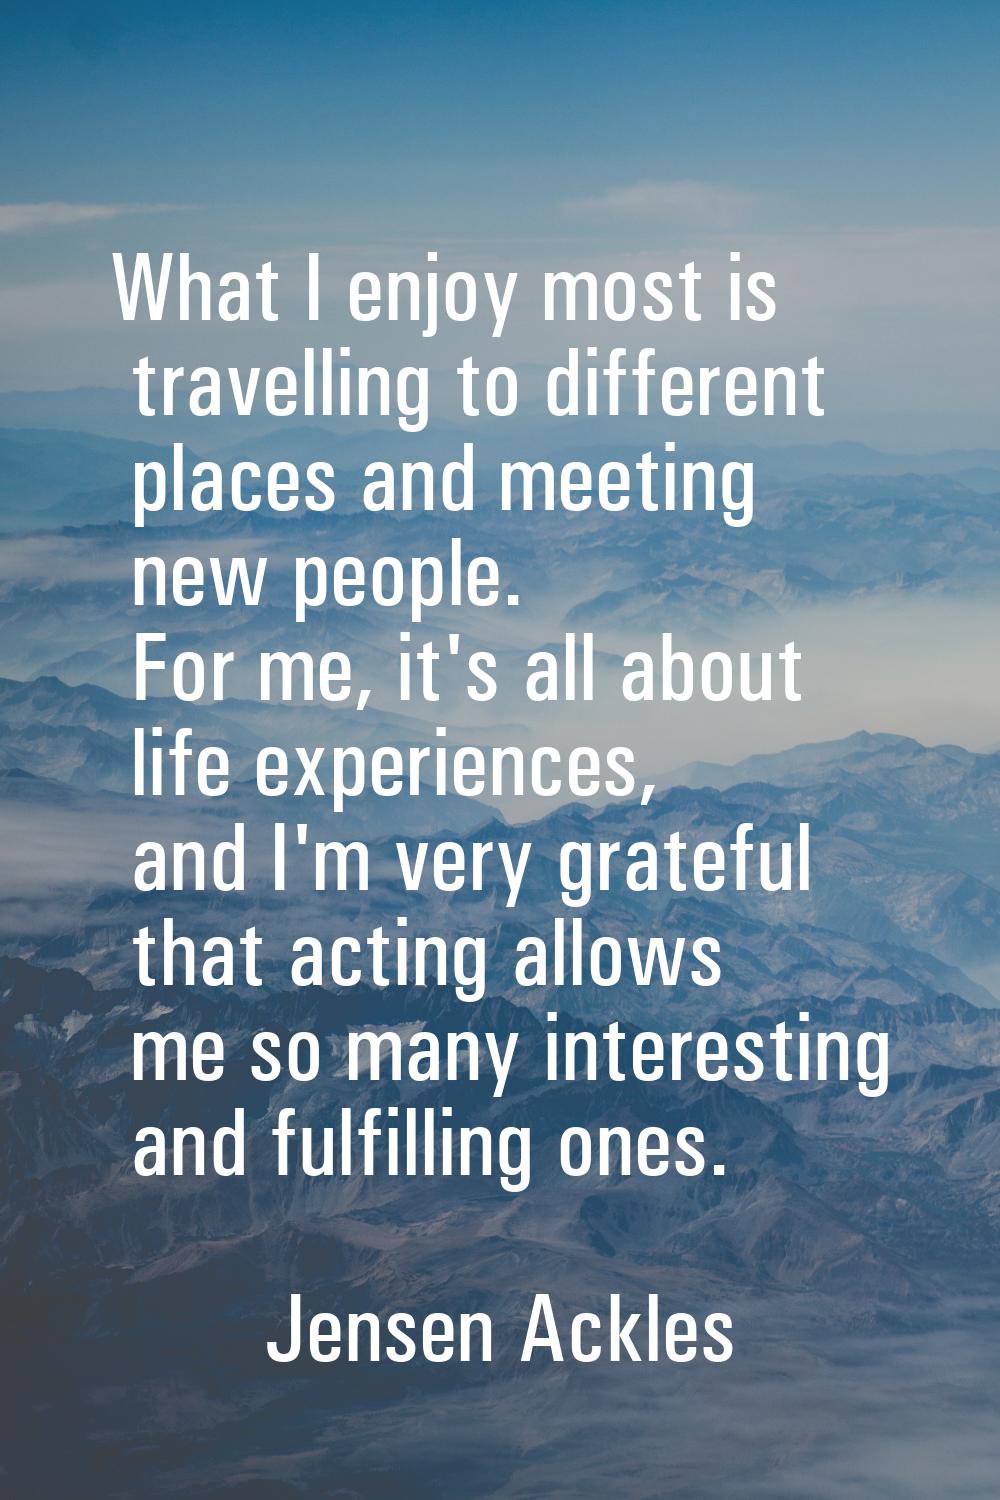 What I enjoy most is travelling to different places and meeting new people. For me, it's all about 